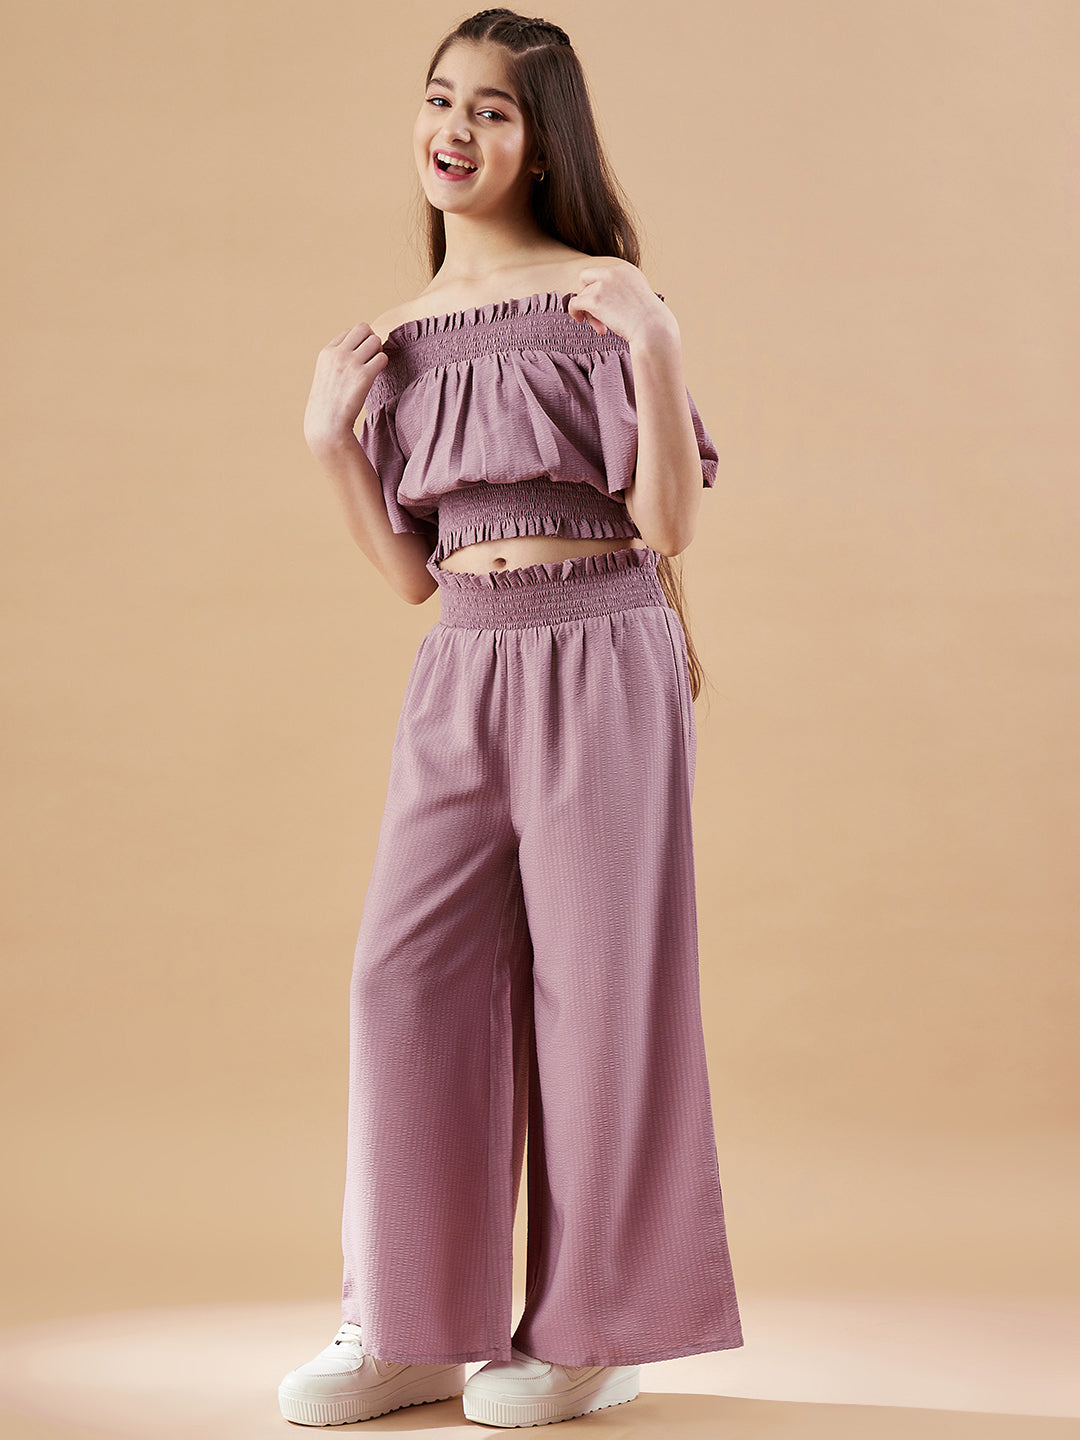 Girls Off-Shoulder Mauve Top with Trousers